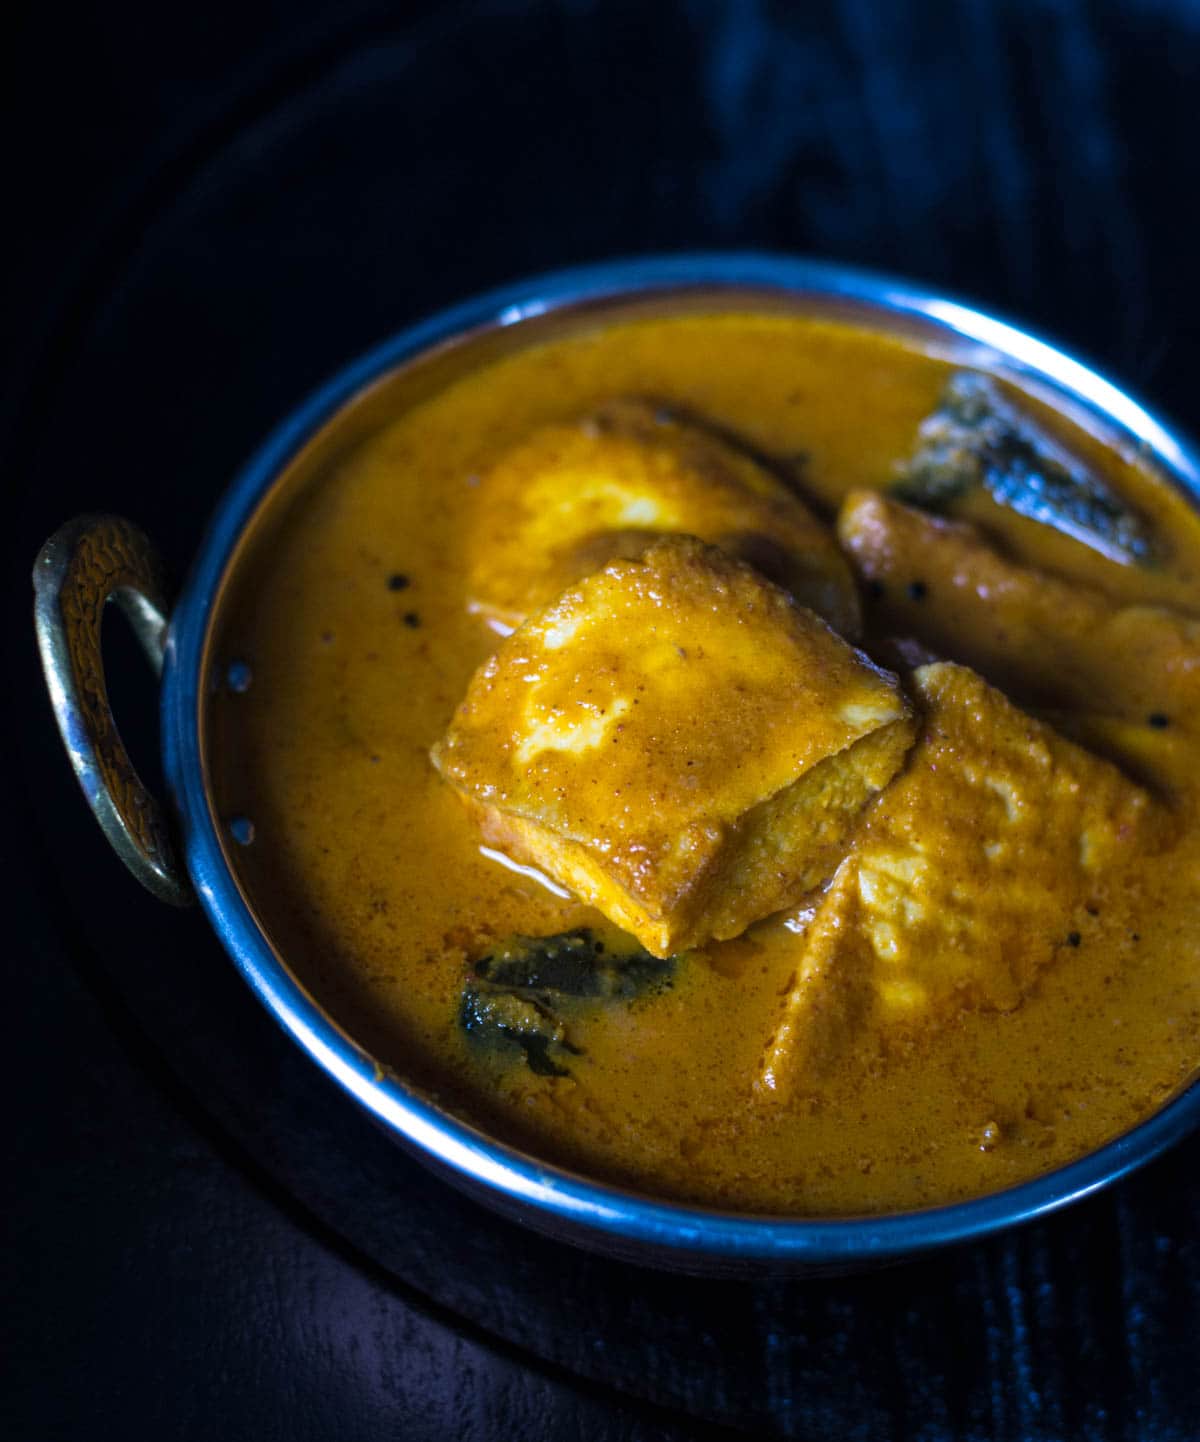 Meen gassi (fish curry) served in a metal bowl